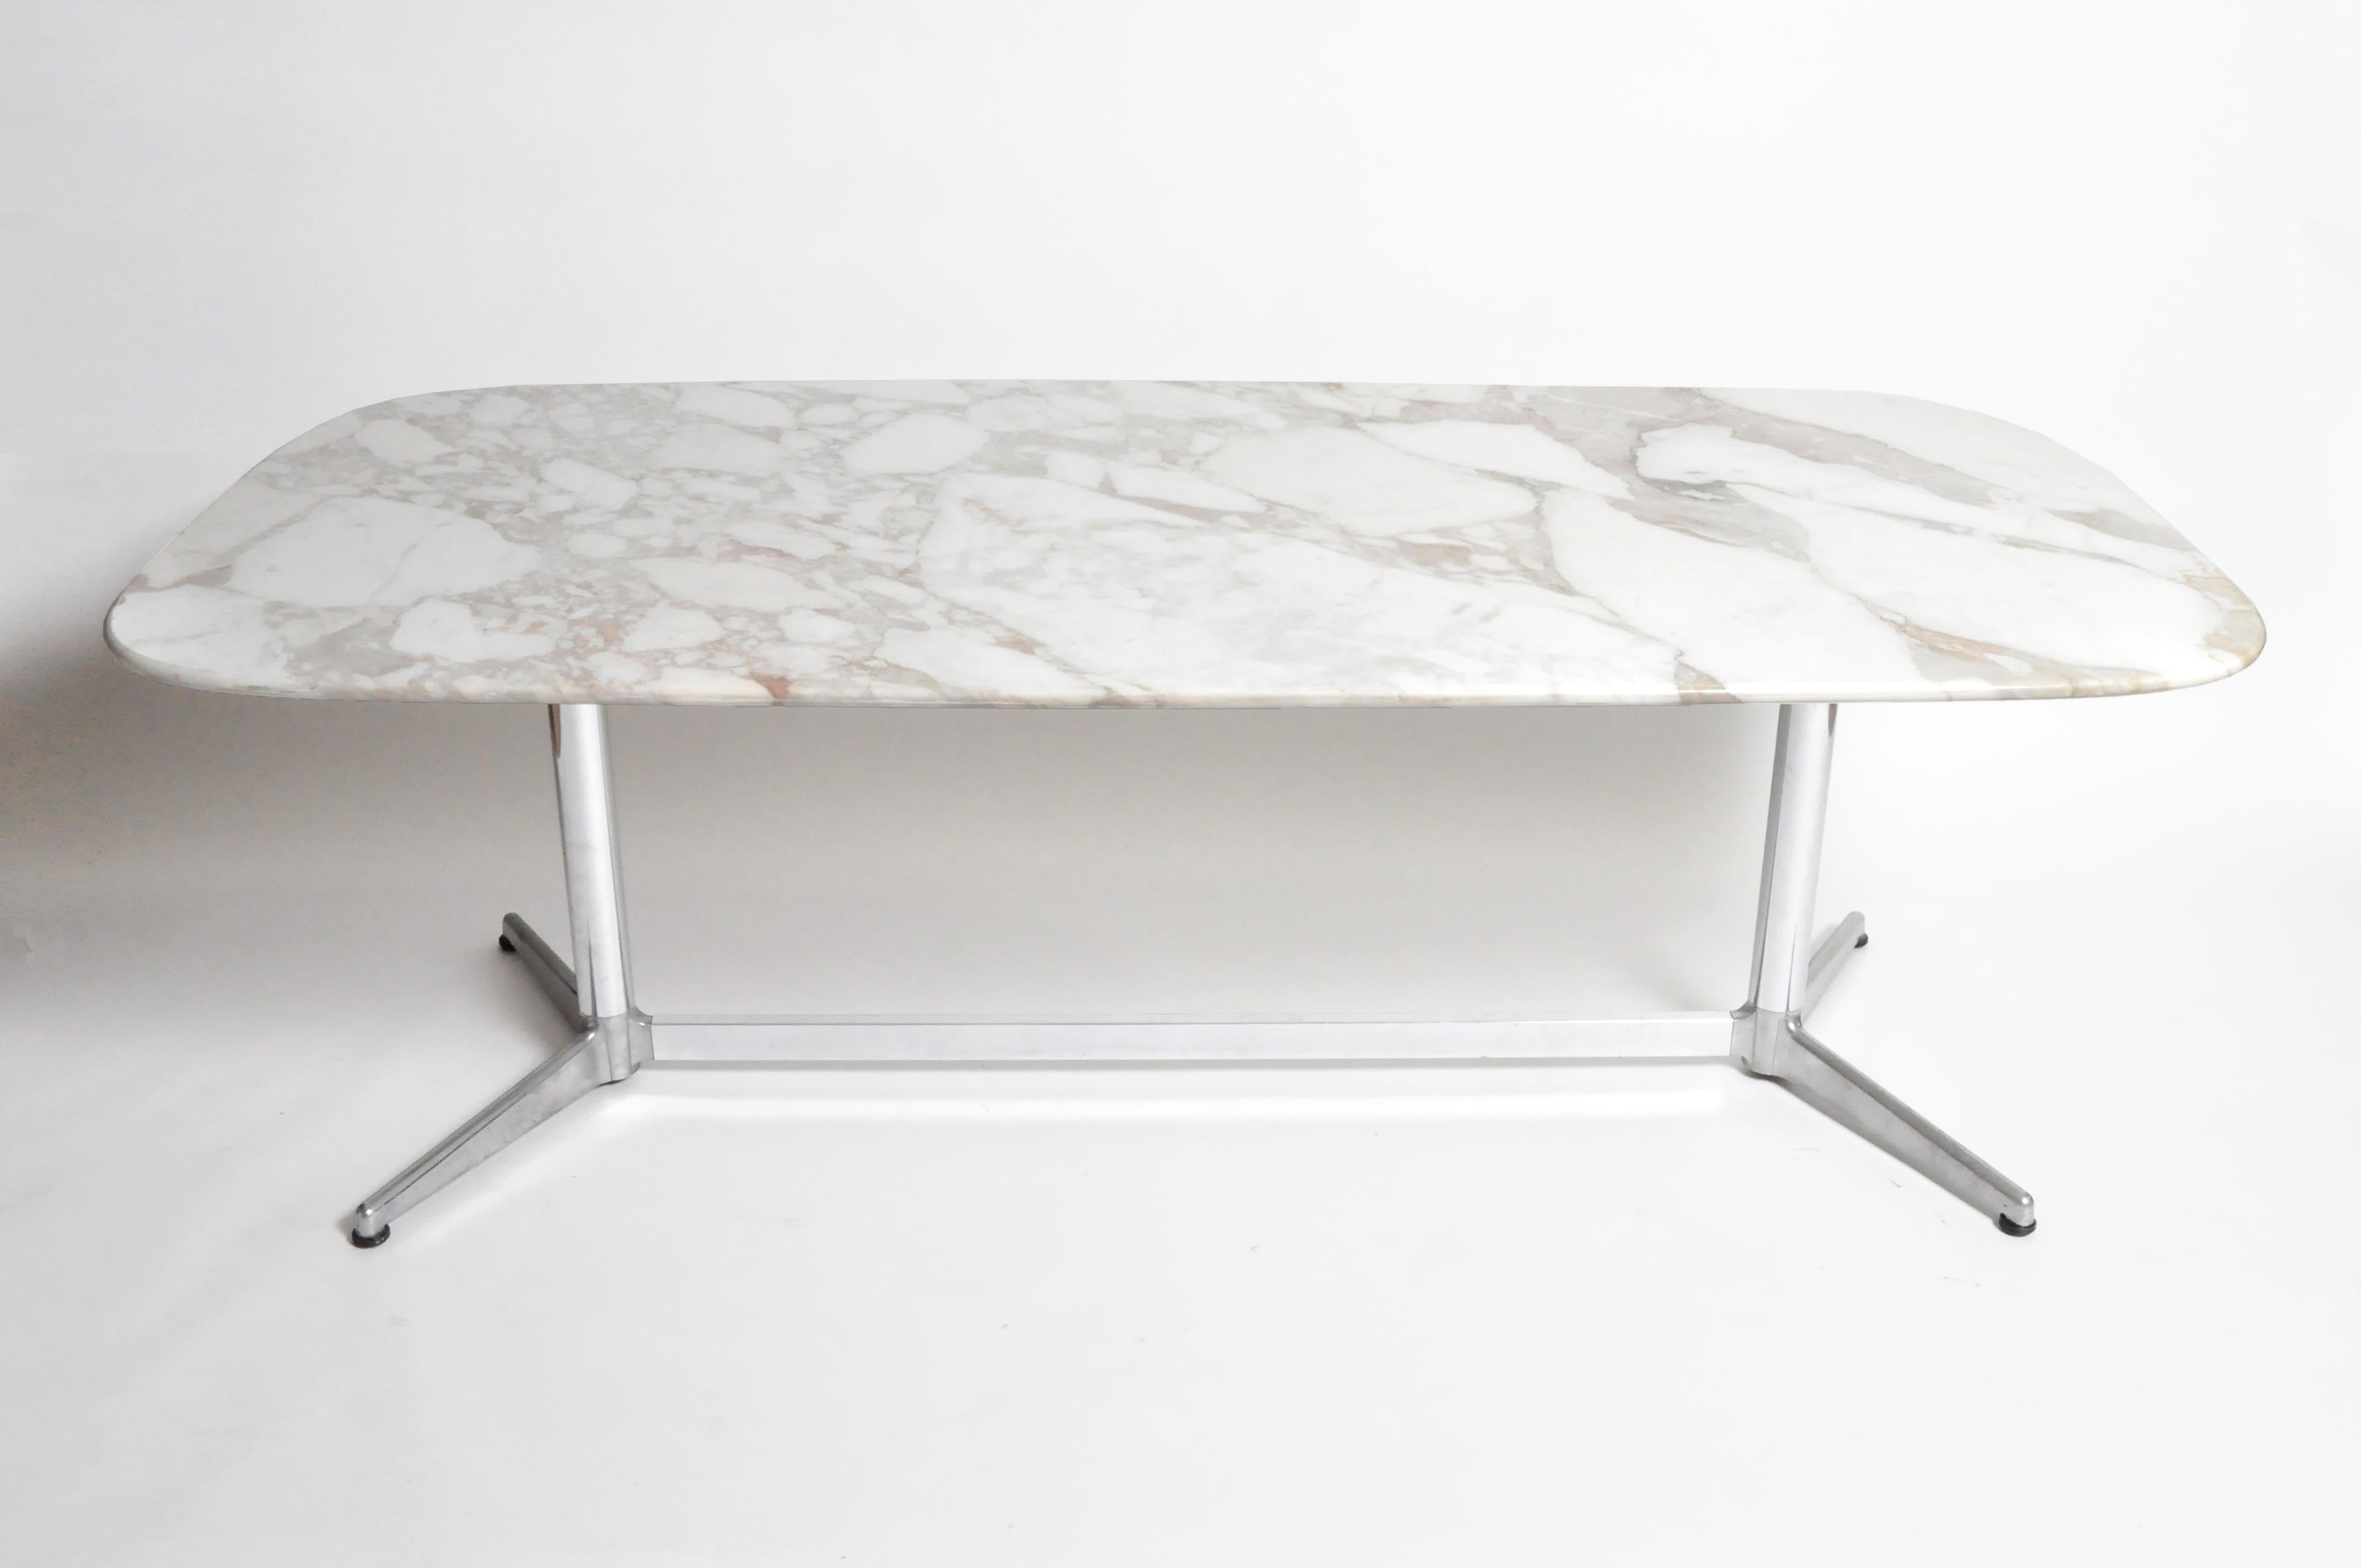 This modern marvel’s stunning oval top is made from a single slab of white stone with grey, gold, and brown veining. The remarkably thin tabletop is raised on a pair of cylindrical chrome-plated pedestal legs, each with two feet, joined by a long